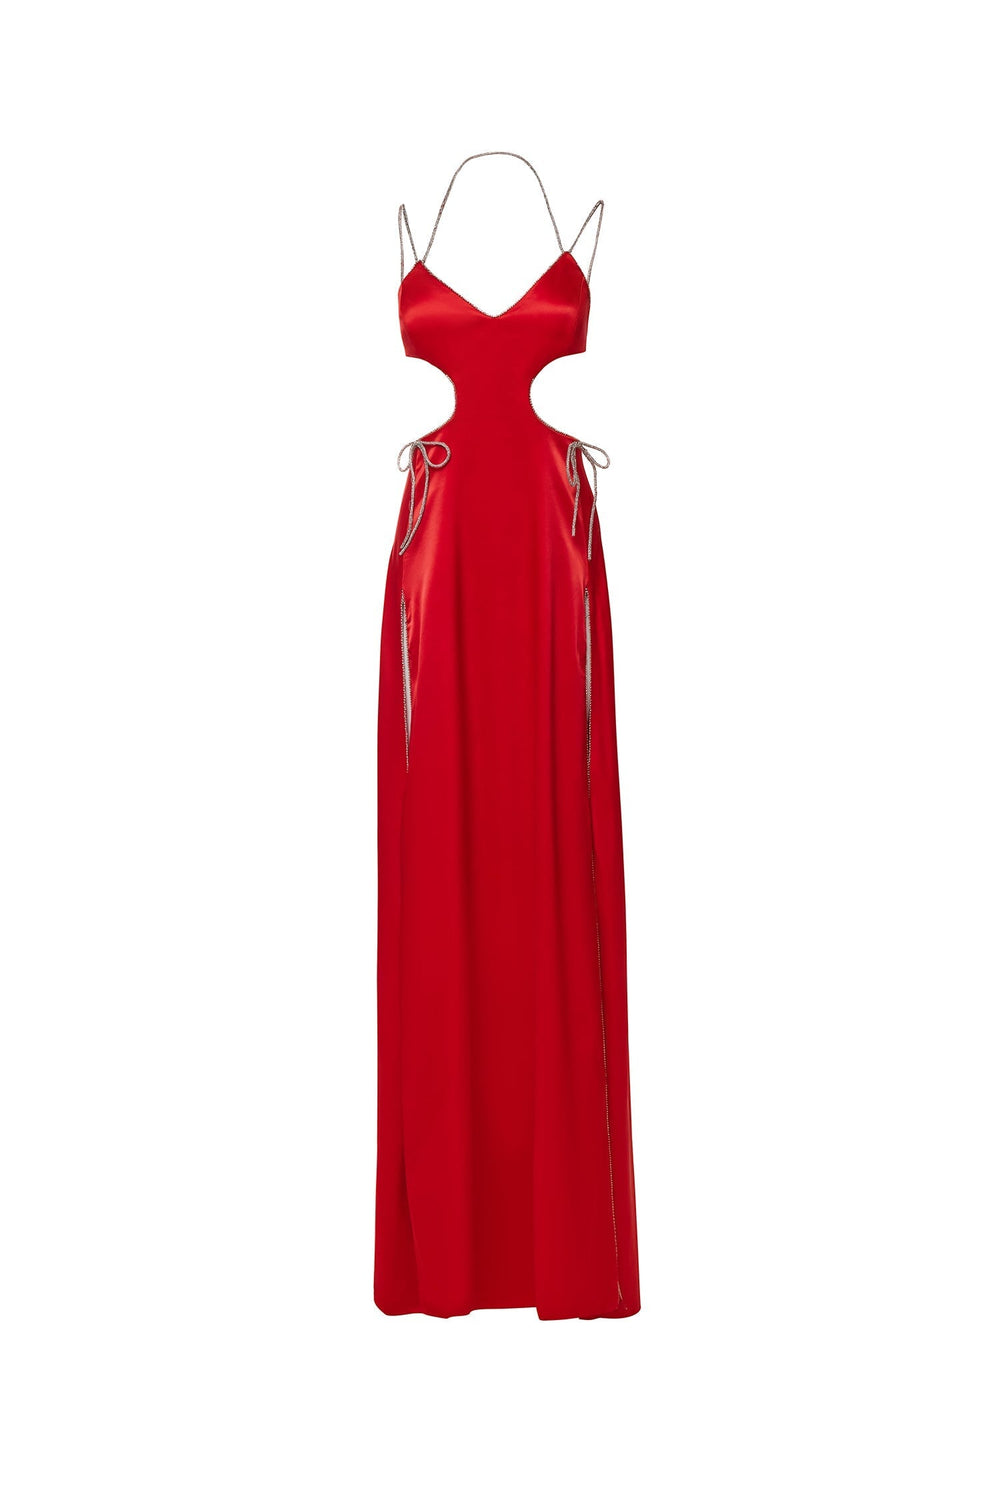 Melinda - Red Satin Gown with Diamante Straps and Bow Ties